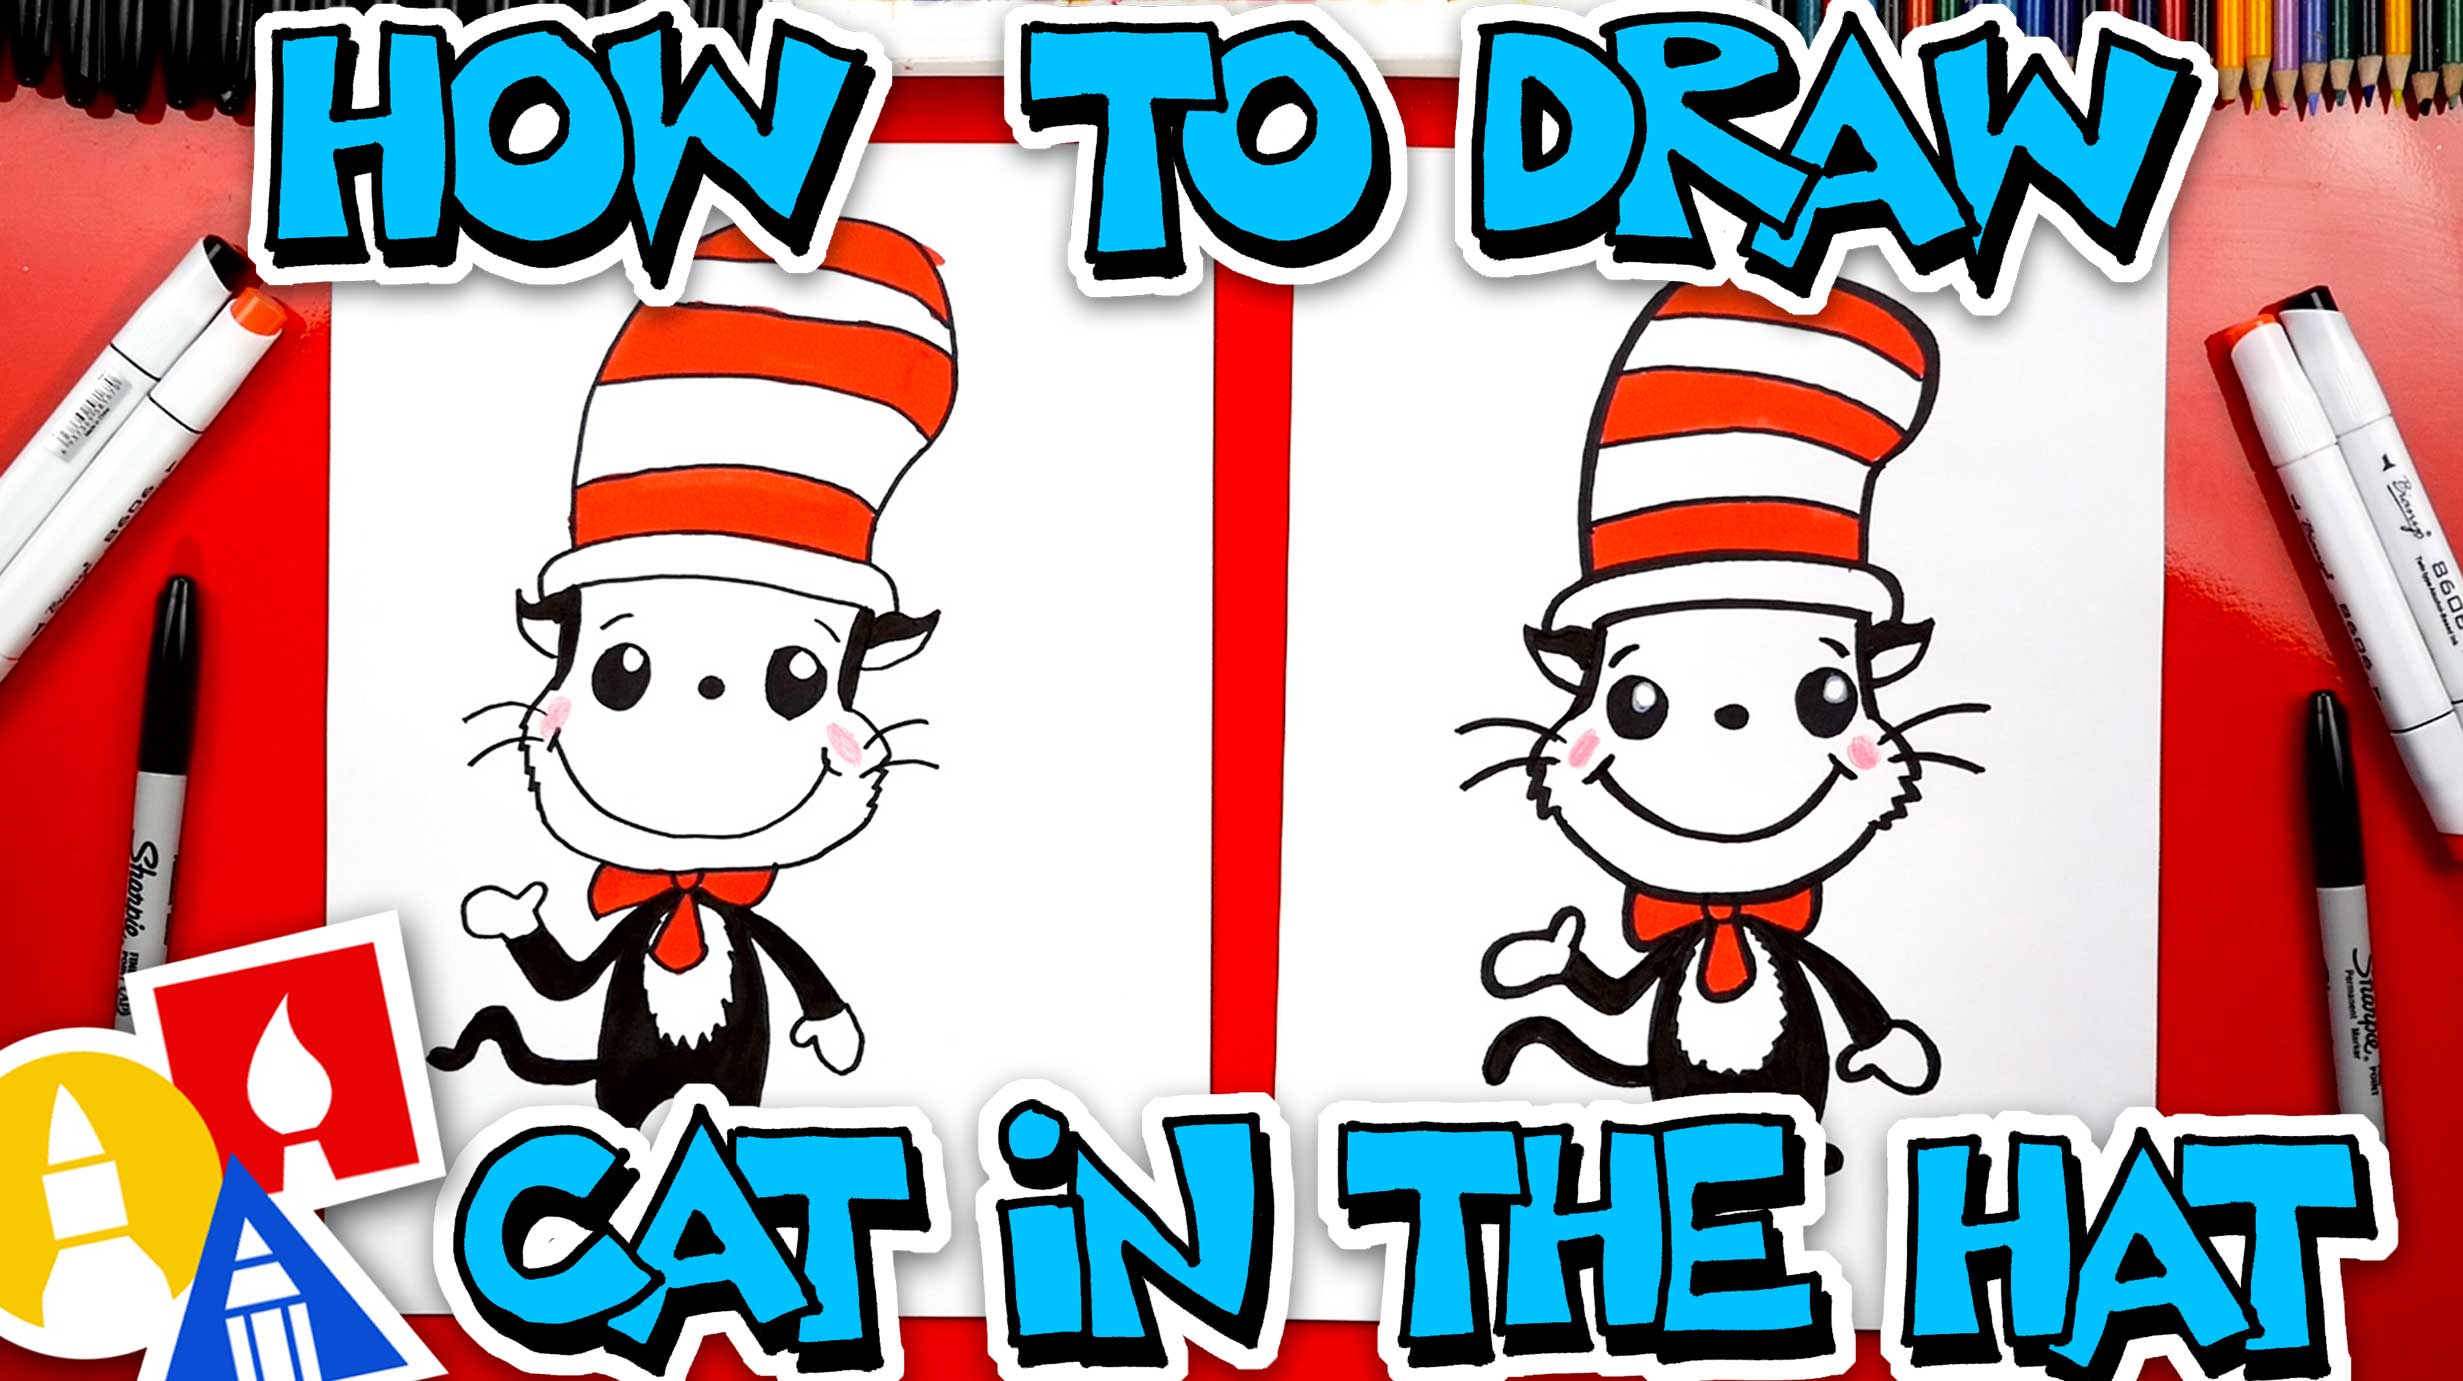 How To Draw The Cat In The Hat (Easy Cartoon Version